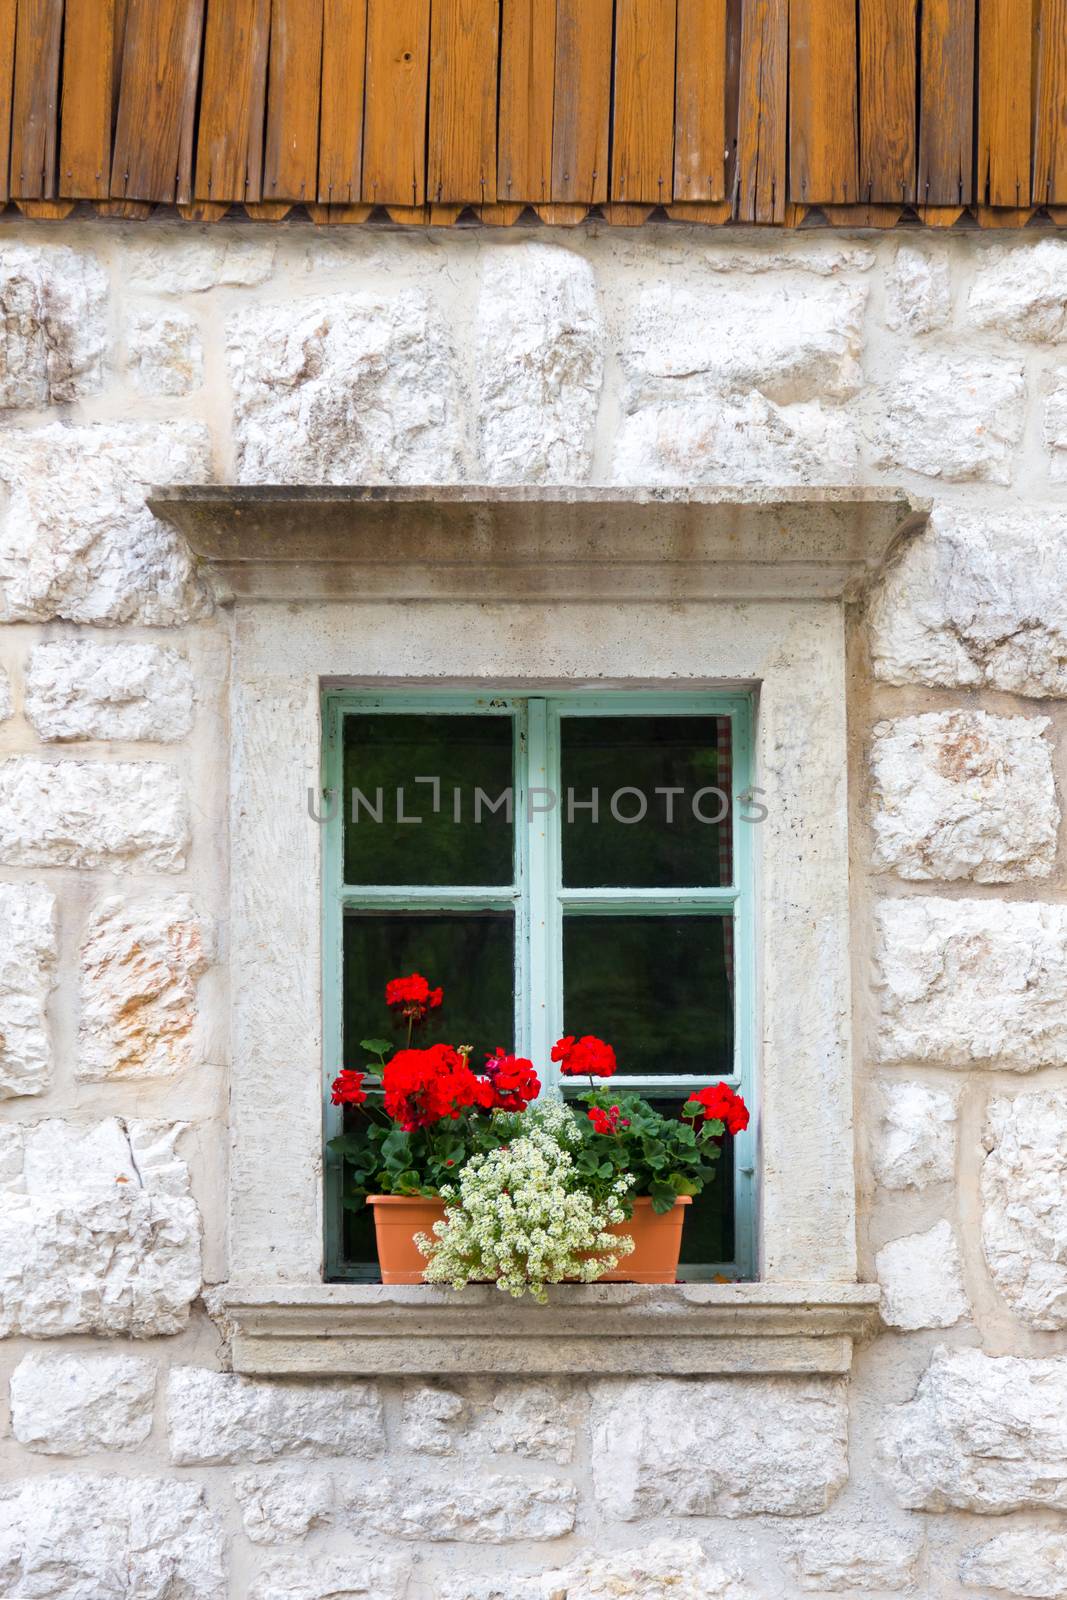 Vintagel alpine stone window with typical red carnation flowers on window sill. Detail from traditional mountain house with wooden paneling.